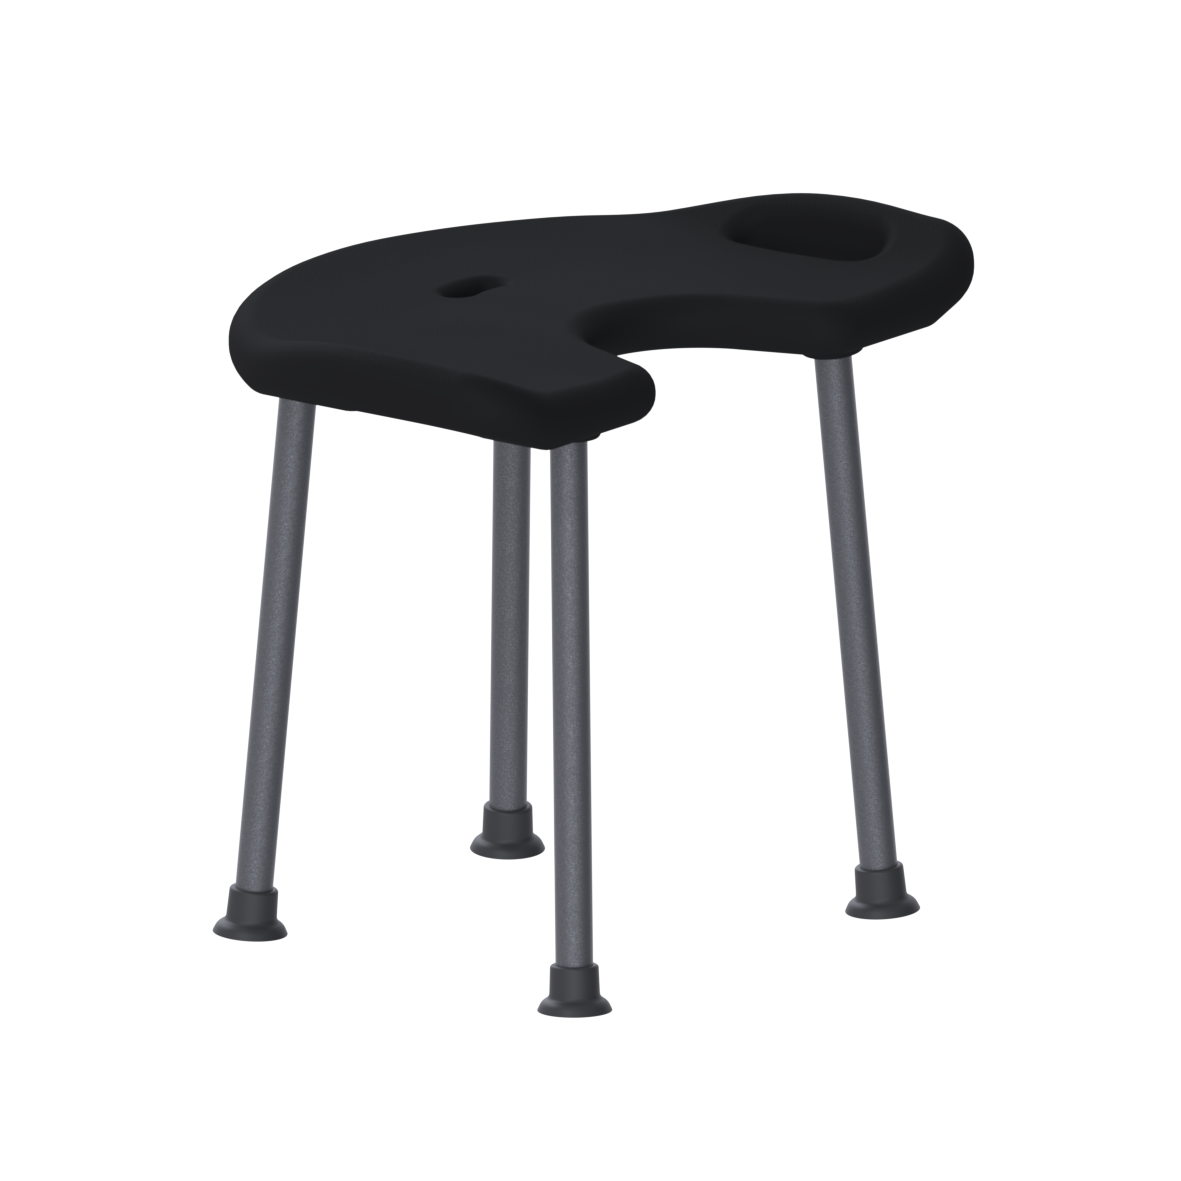 Cavere Care Stool, with hygiene recess, 595 x 410 x 510 mm, Cavere Metallic anthracite, padded, colour black